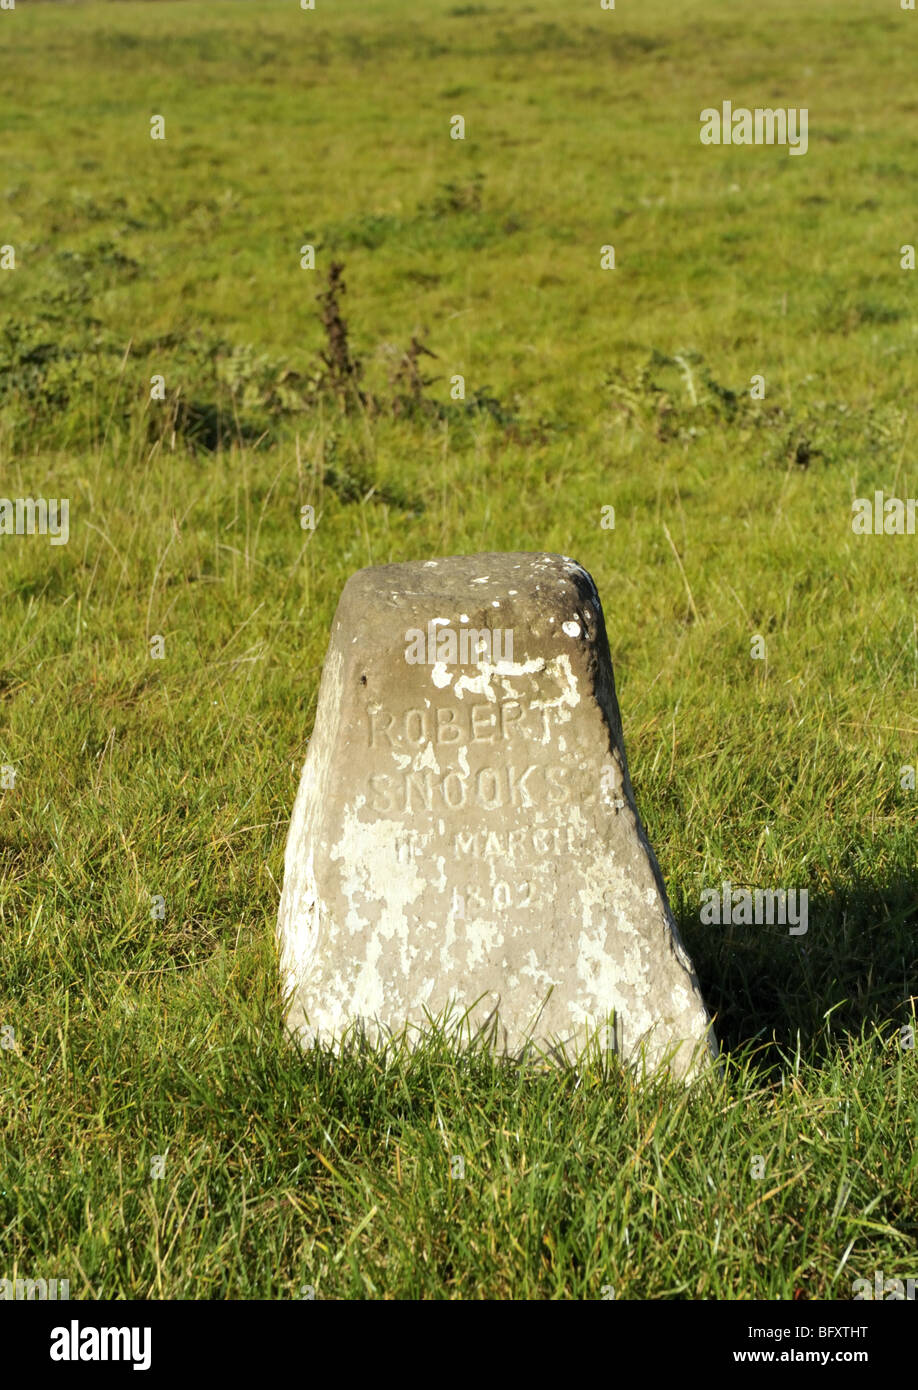 Grave of Robert Snooks, the last man to be executed in England for highway robbery. Stock Photo